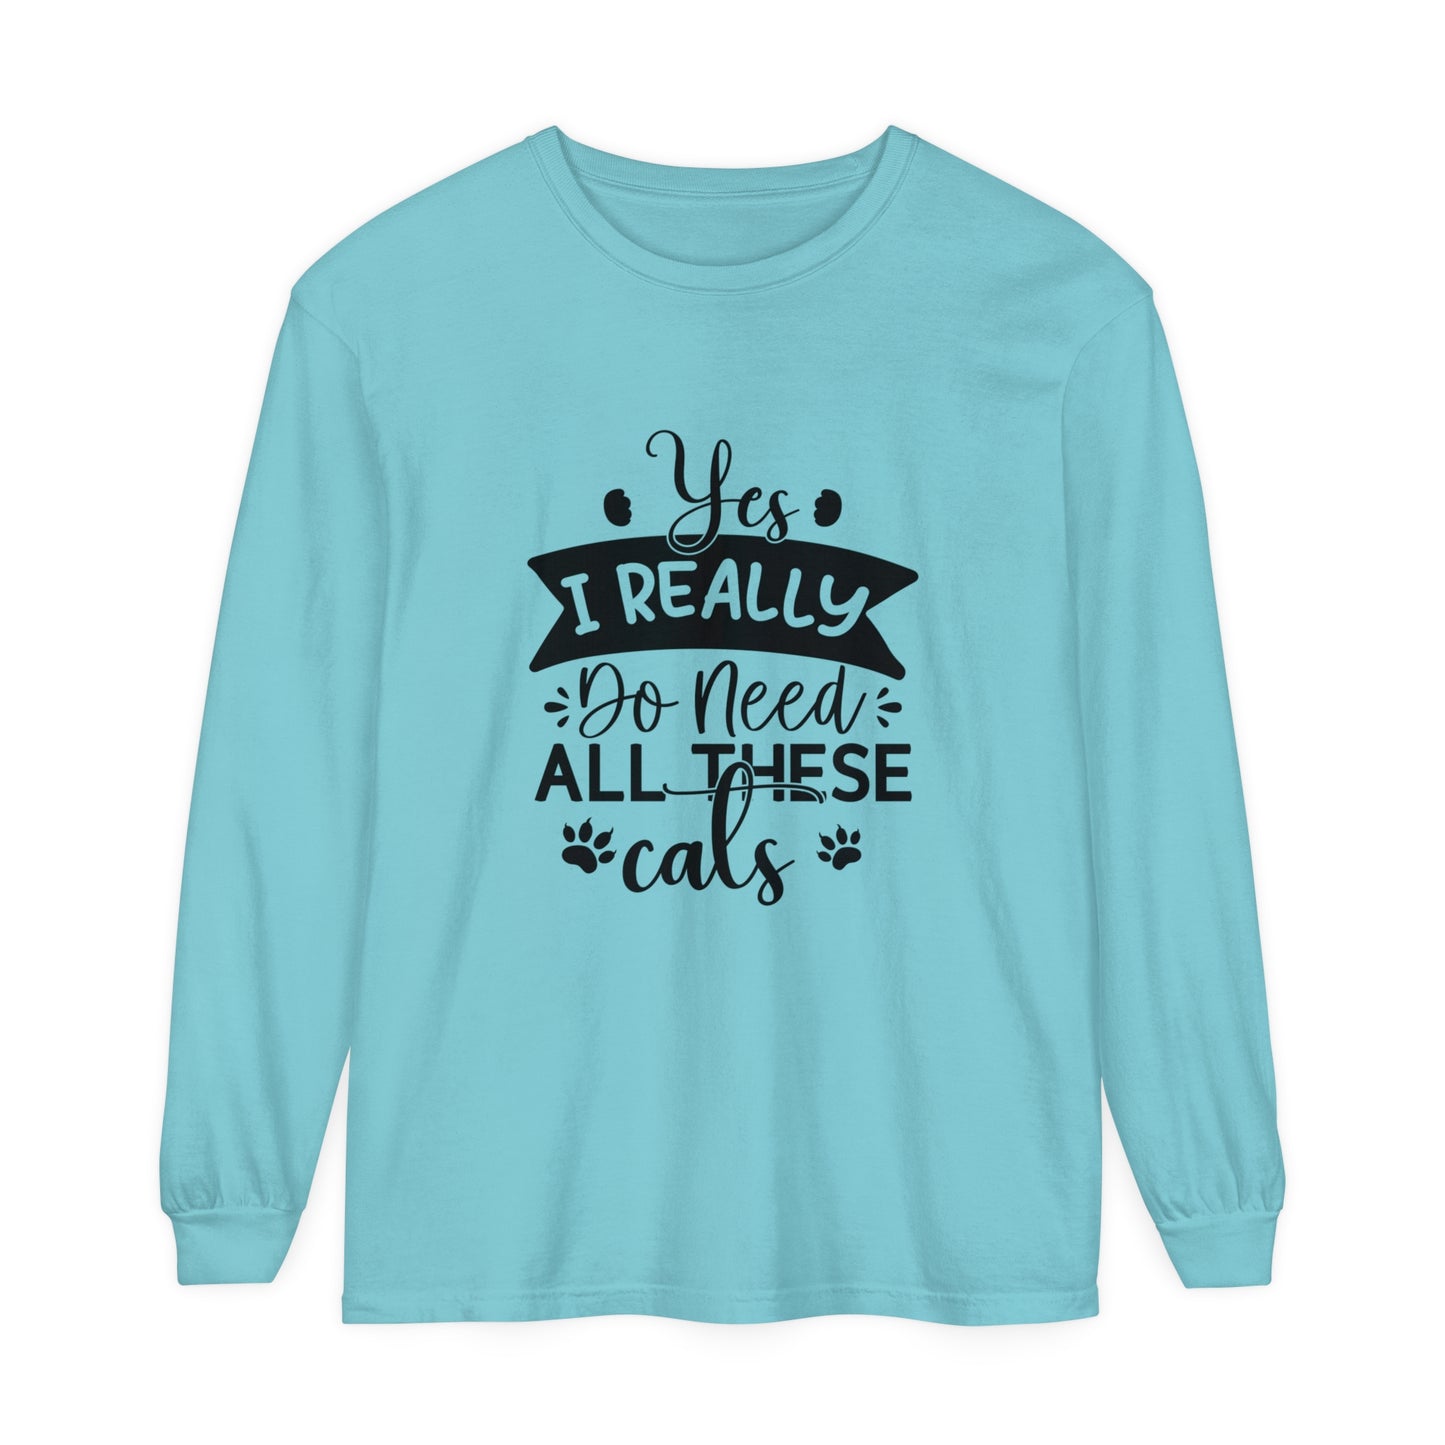 Yes I really need all these cats Women's Loose Long Sleeve T-Shirt